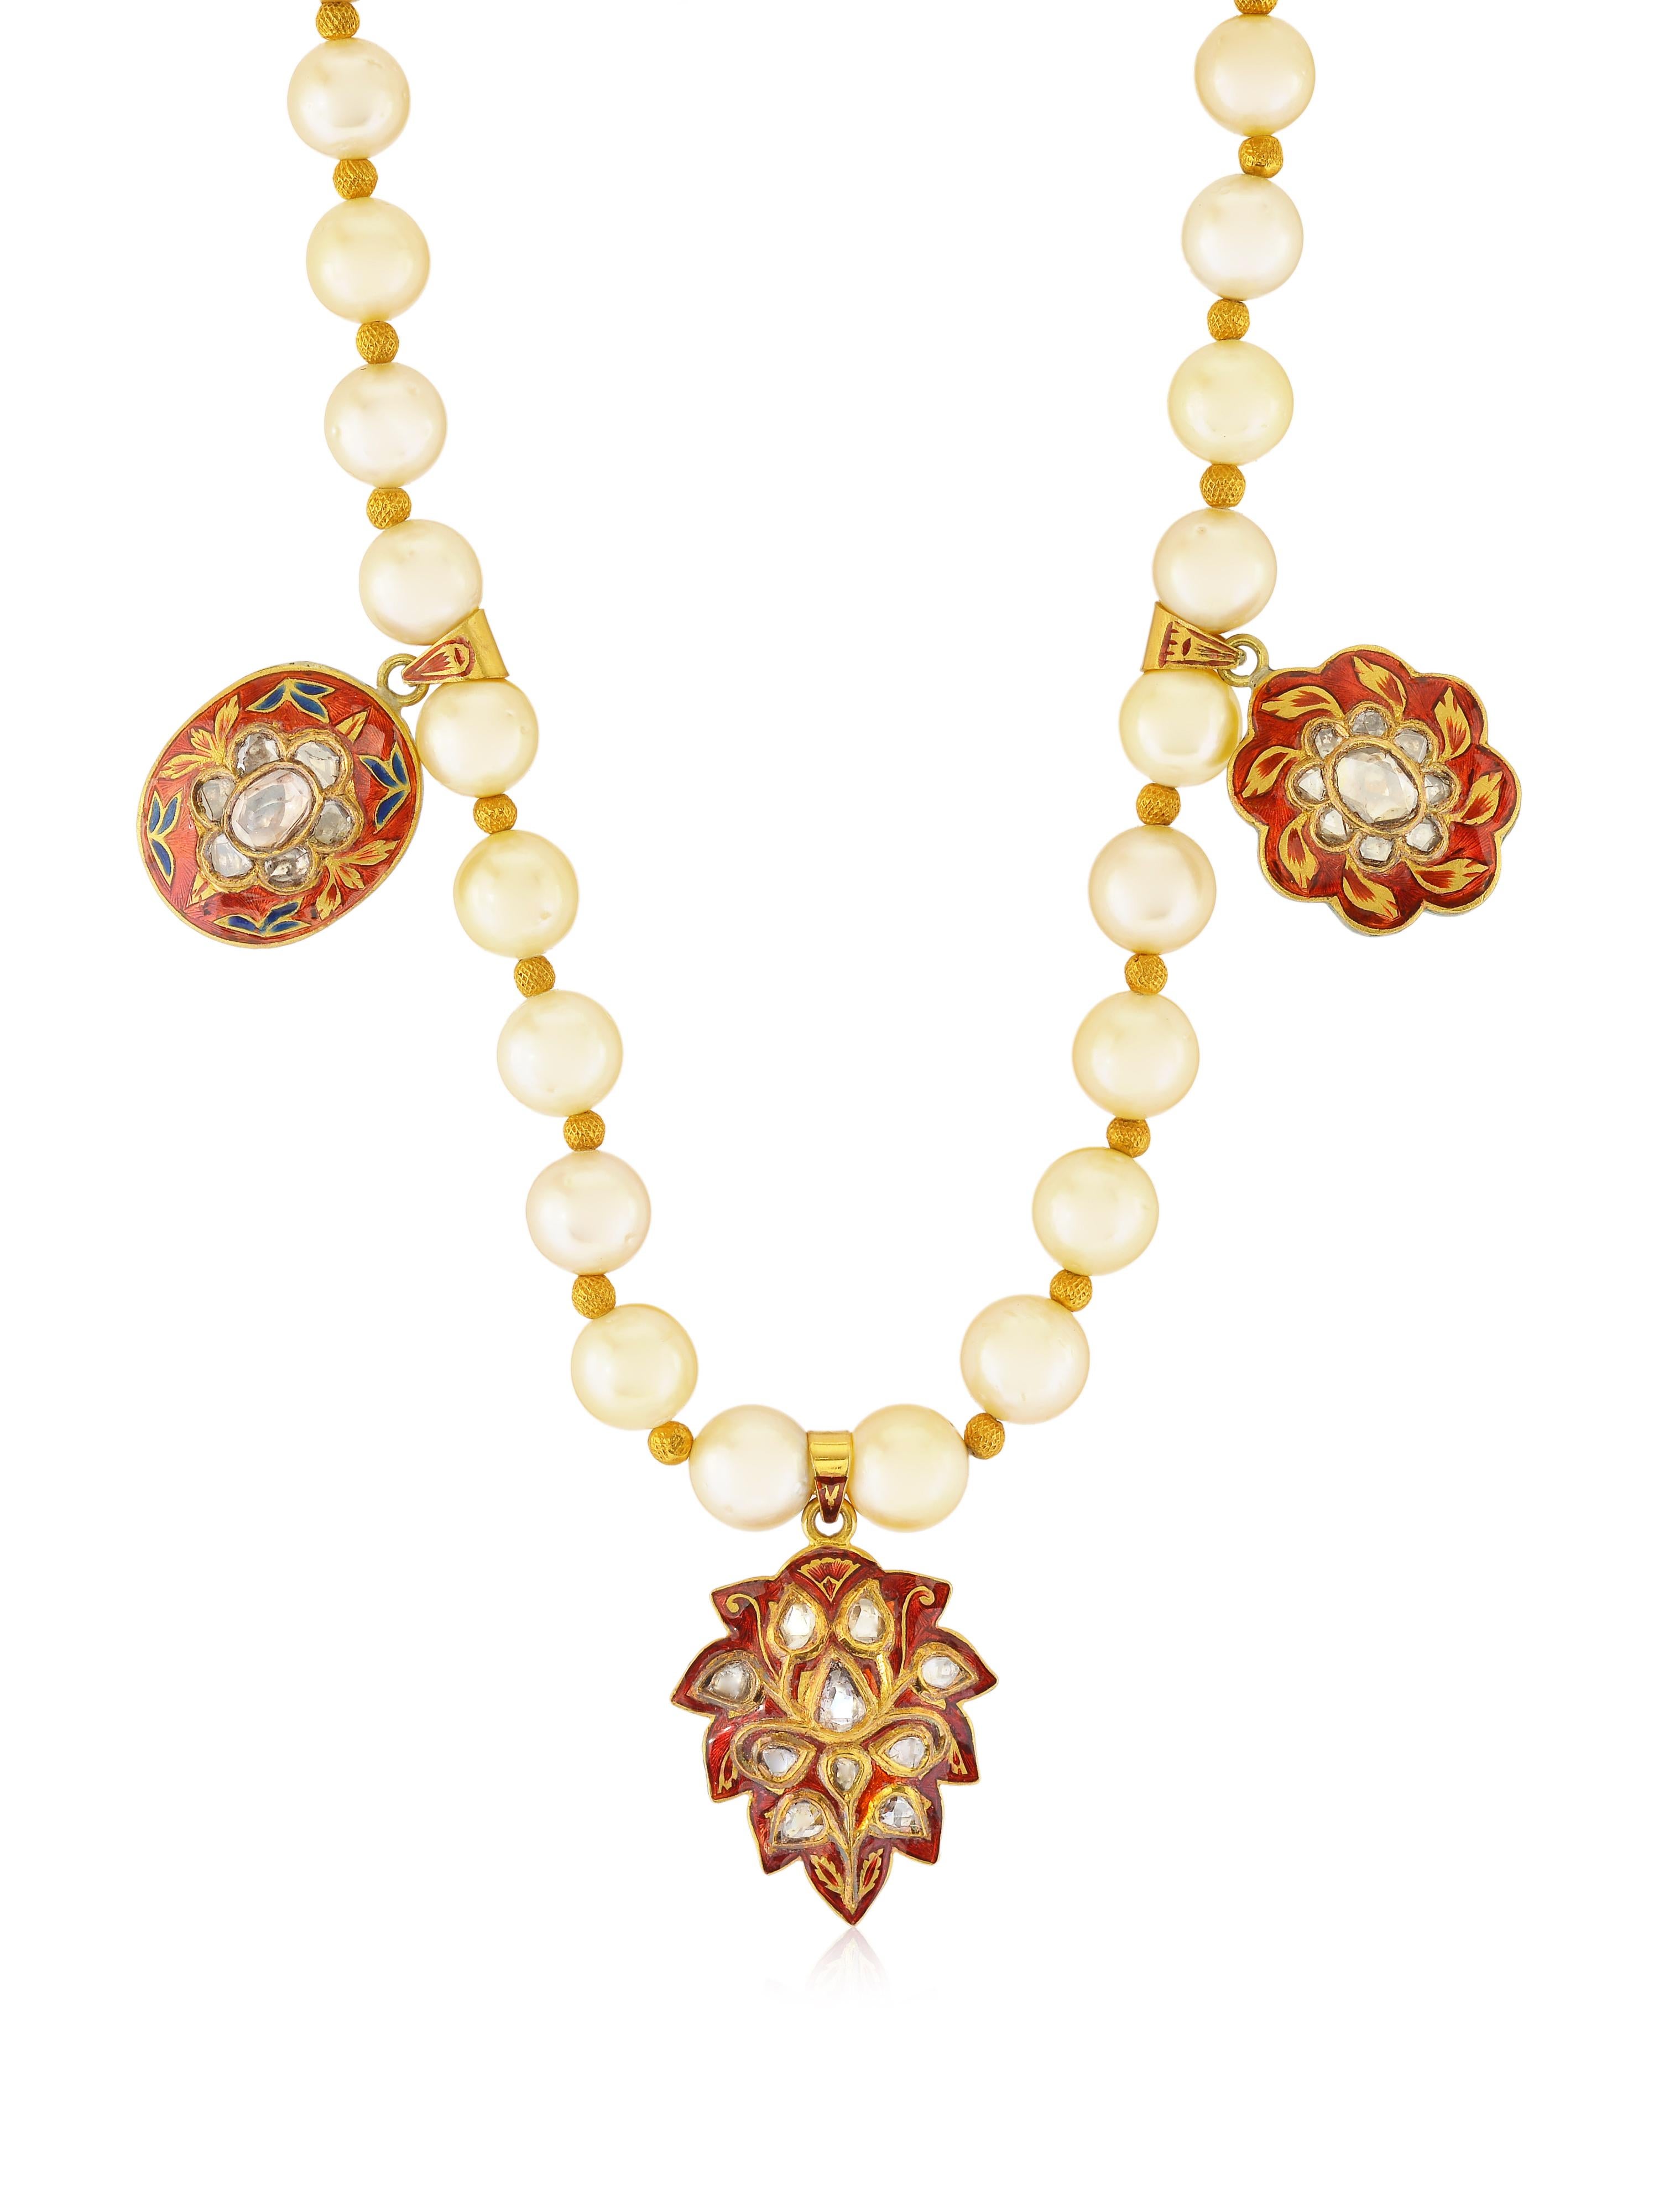 A beautiful pearl necklace with 3 pendants with enamel work and diamonds. It's a clssic necklace suitable for all occasions. The Pendants are all handmade with traditional Indian Enamel work called 